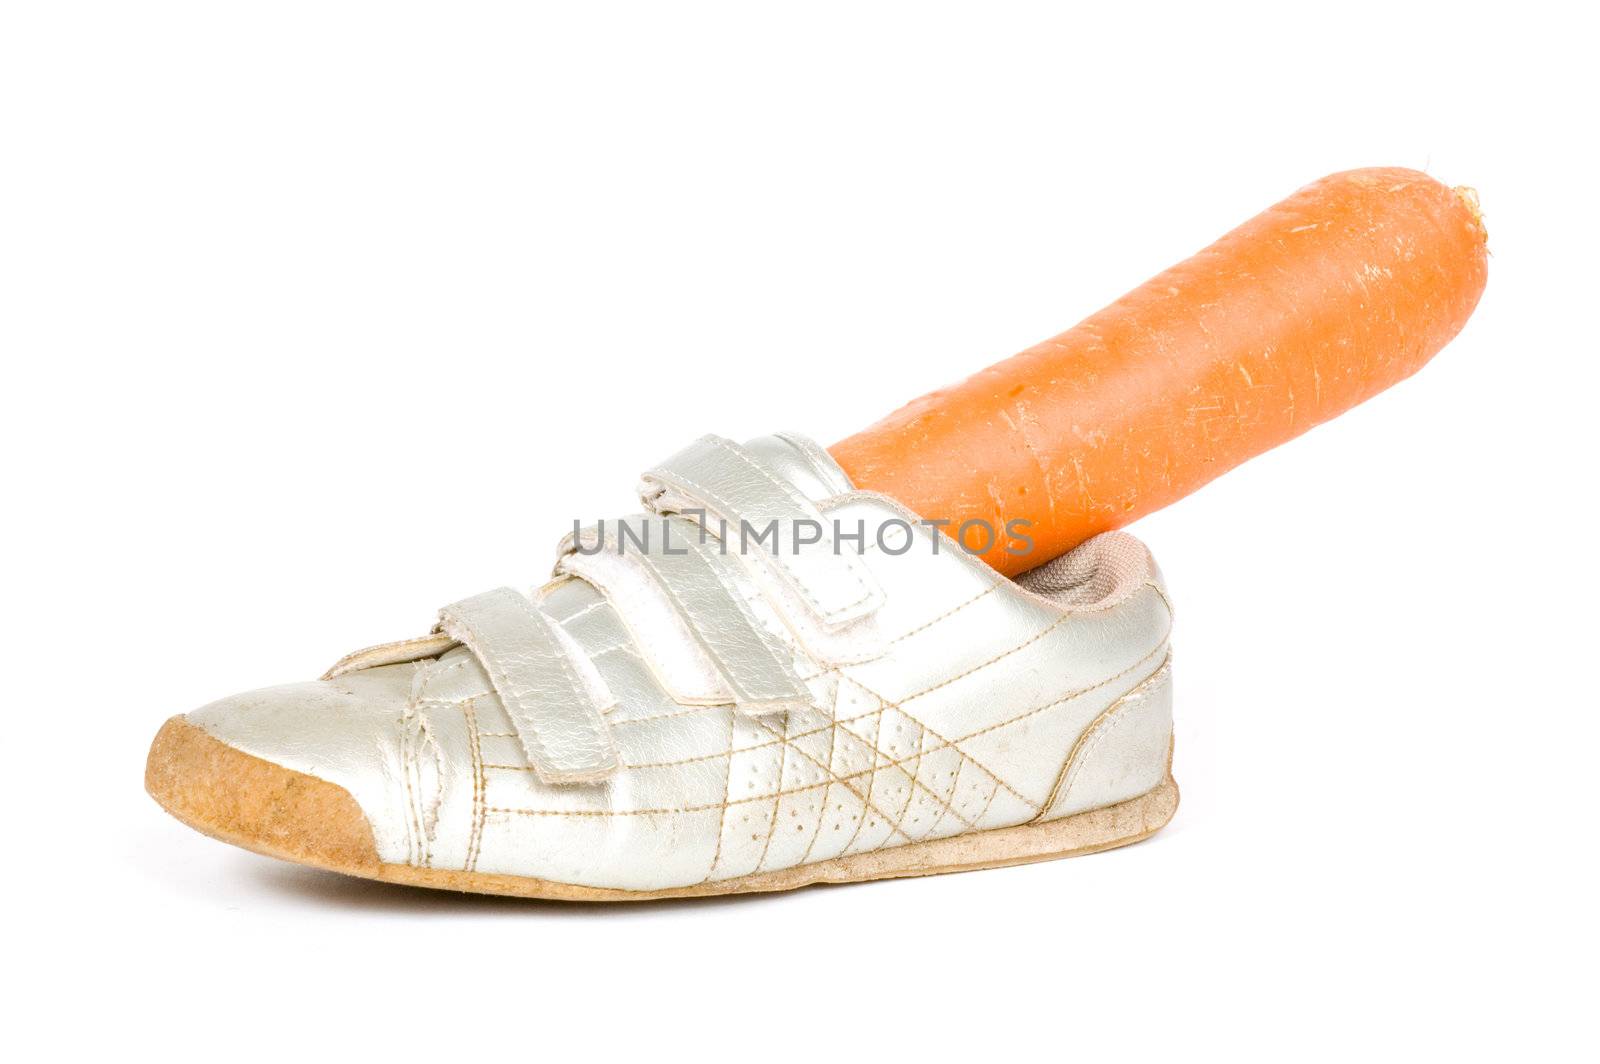 Shoe with carrot for the horse from Sinterklaas  on white

